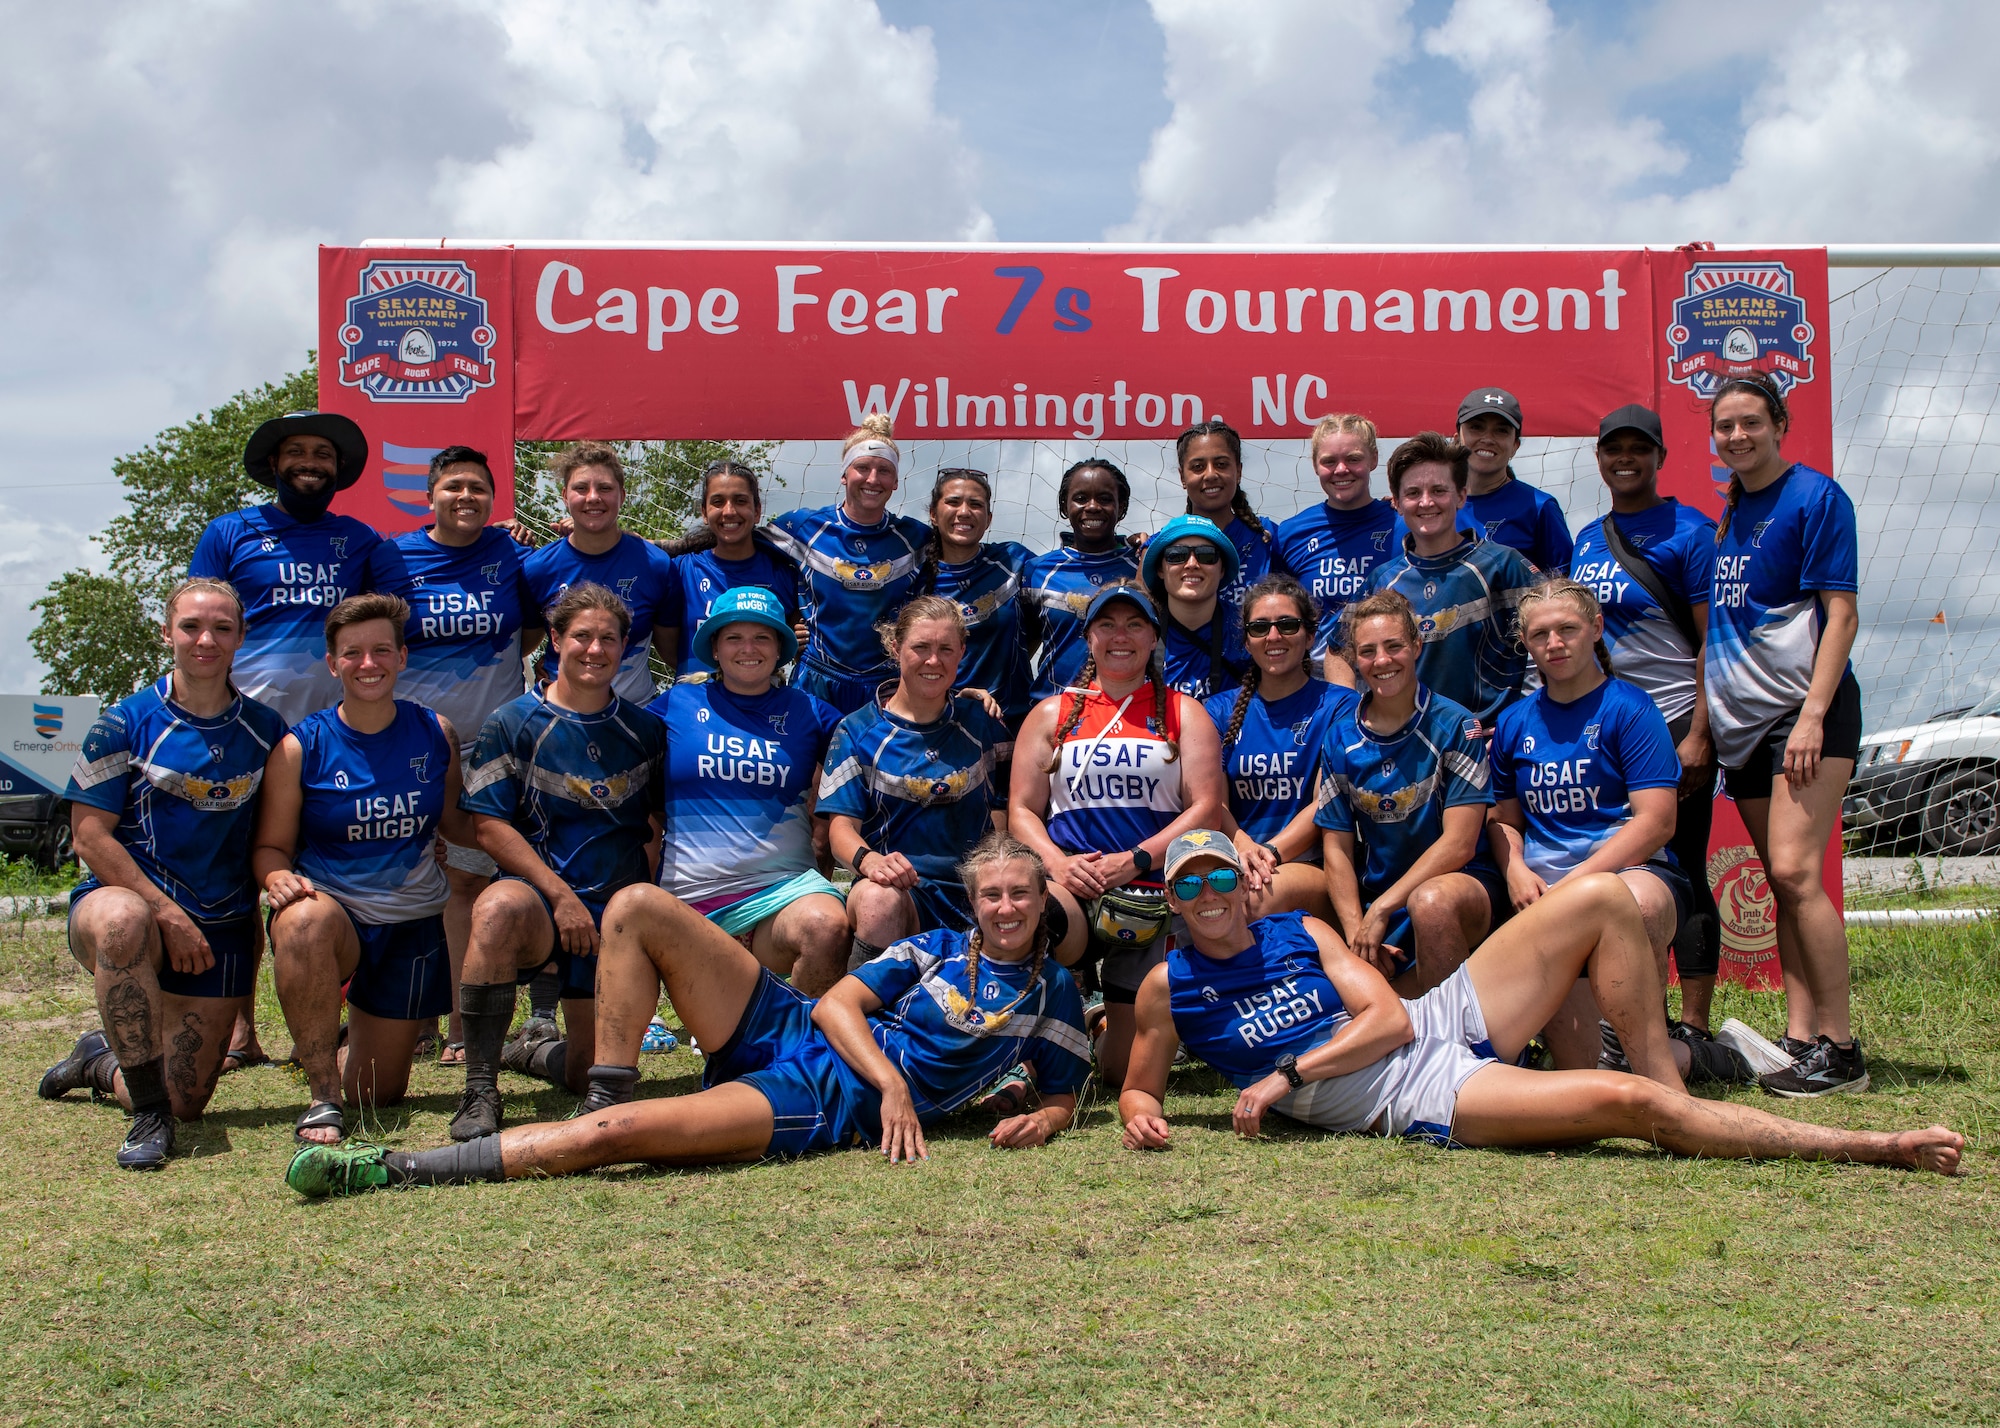 The United States Air Force rugby team poses for a group photo at the Annual Armed Forces Women’s Rugby Championship in Wilmington, North Carolina, June 26, 2021.